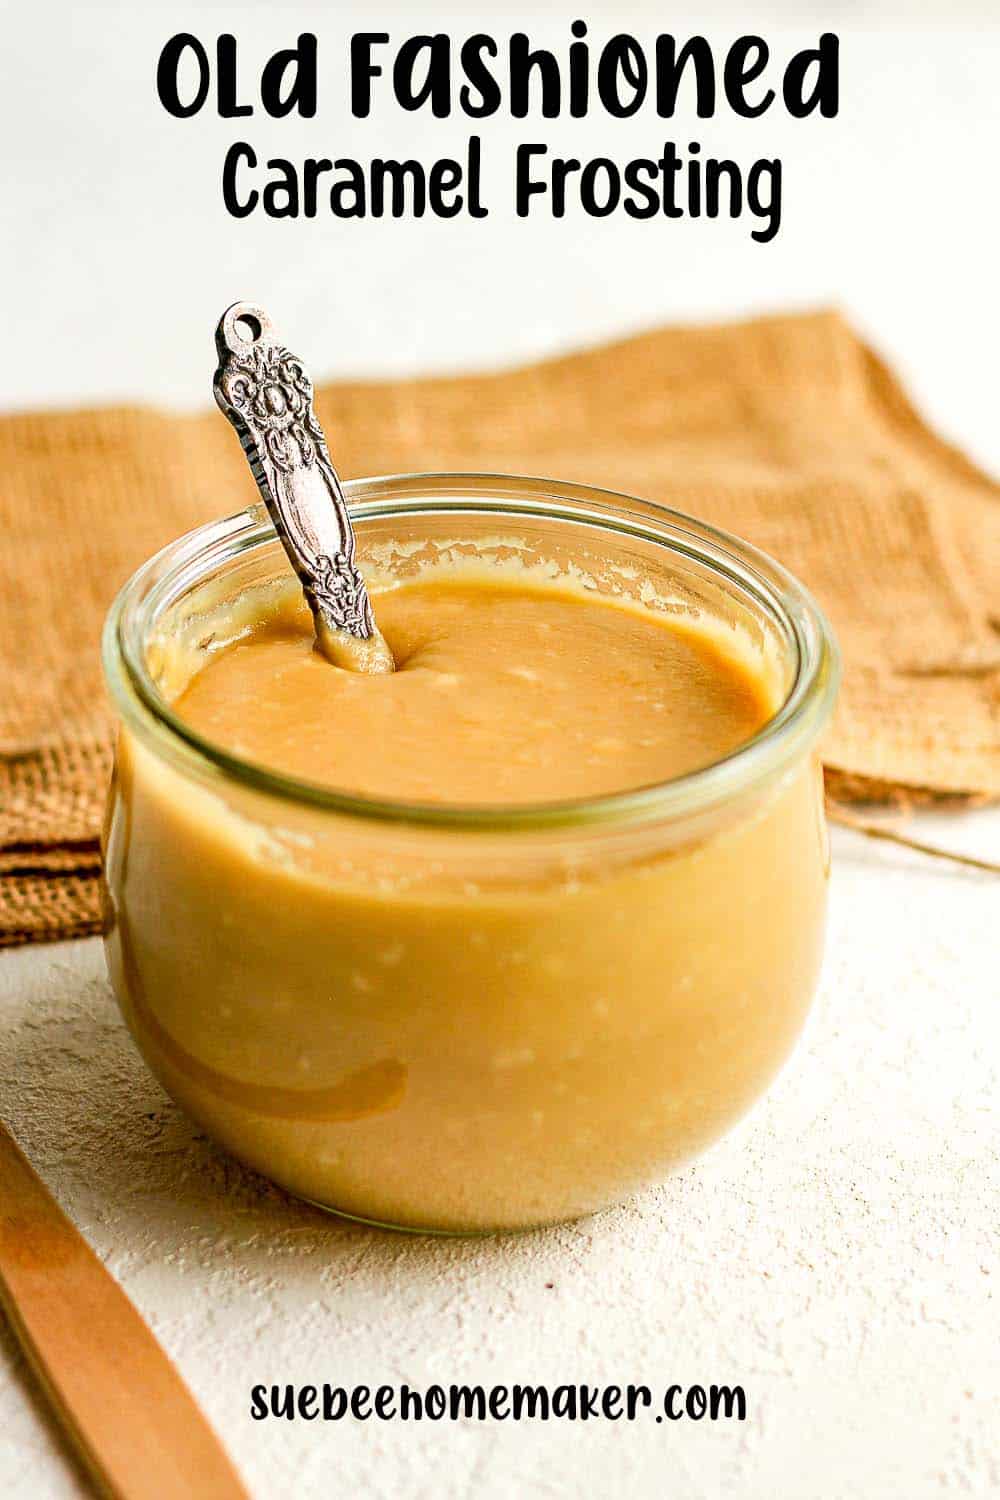 A jar of old fashioned caramel frosting with a spoon inside the jar.